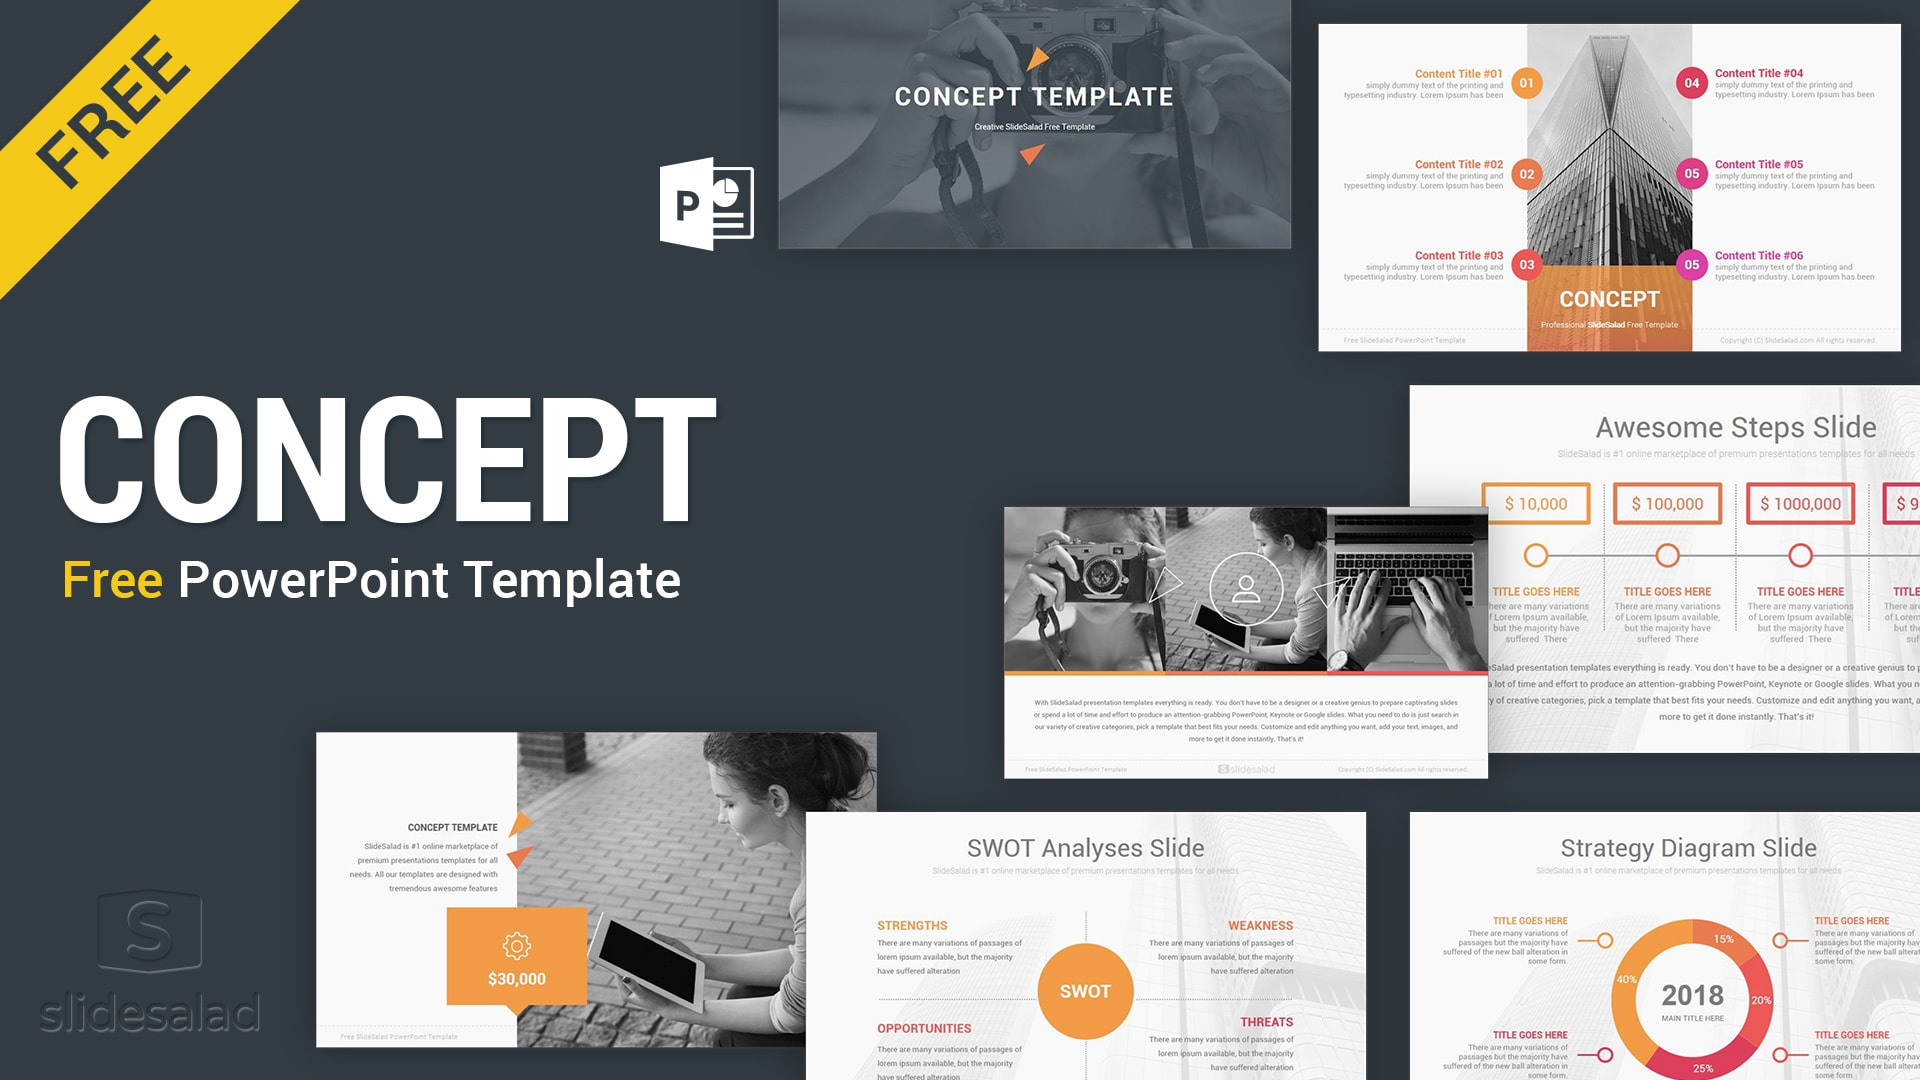 Best Free Presentation Templates Professional Designs 2019 For Virus Powerpoint Template Free Download